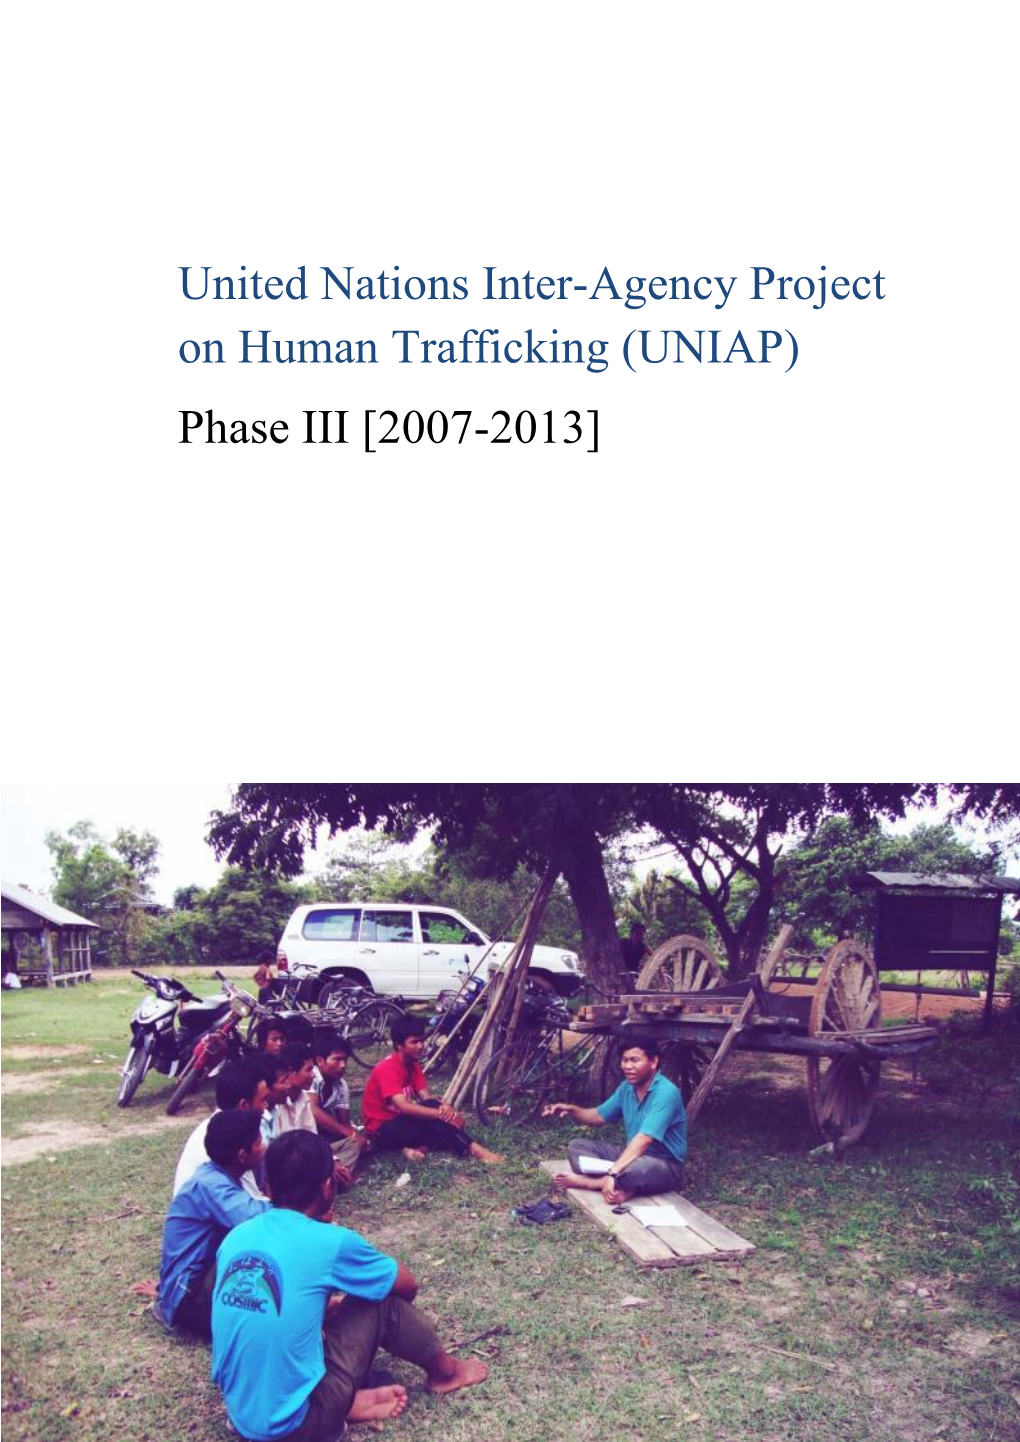 United Nations Inter-Agency Project on Human Trafficking (UNIAP) Phase III [2007-2013]